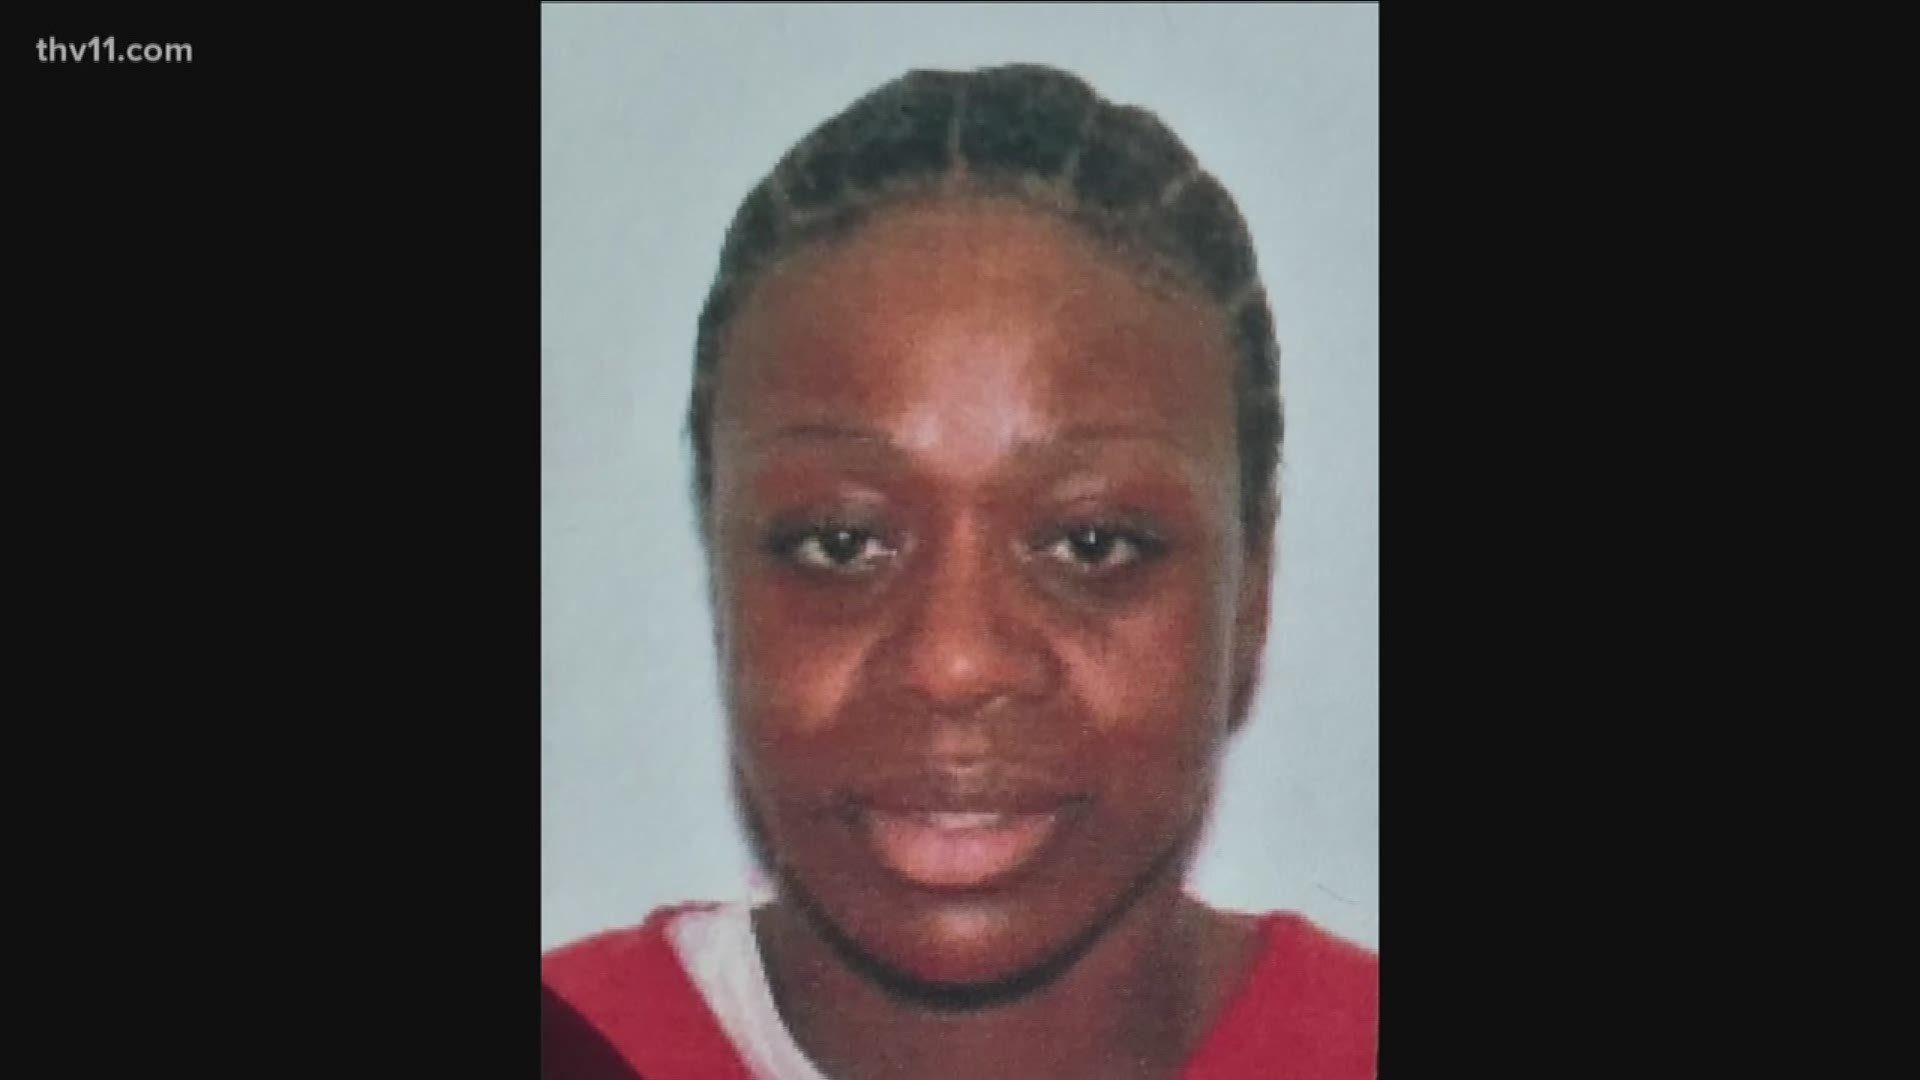 Police are searching for 39-year-old Stephanie Brickey in connection to the killing of 56-year-old Leslie Bradley from Altheimer.